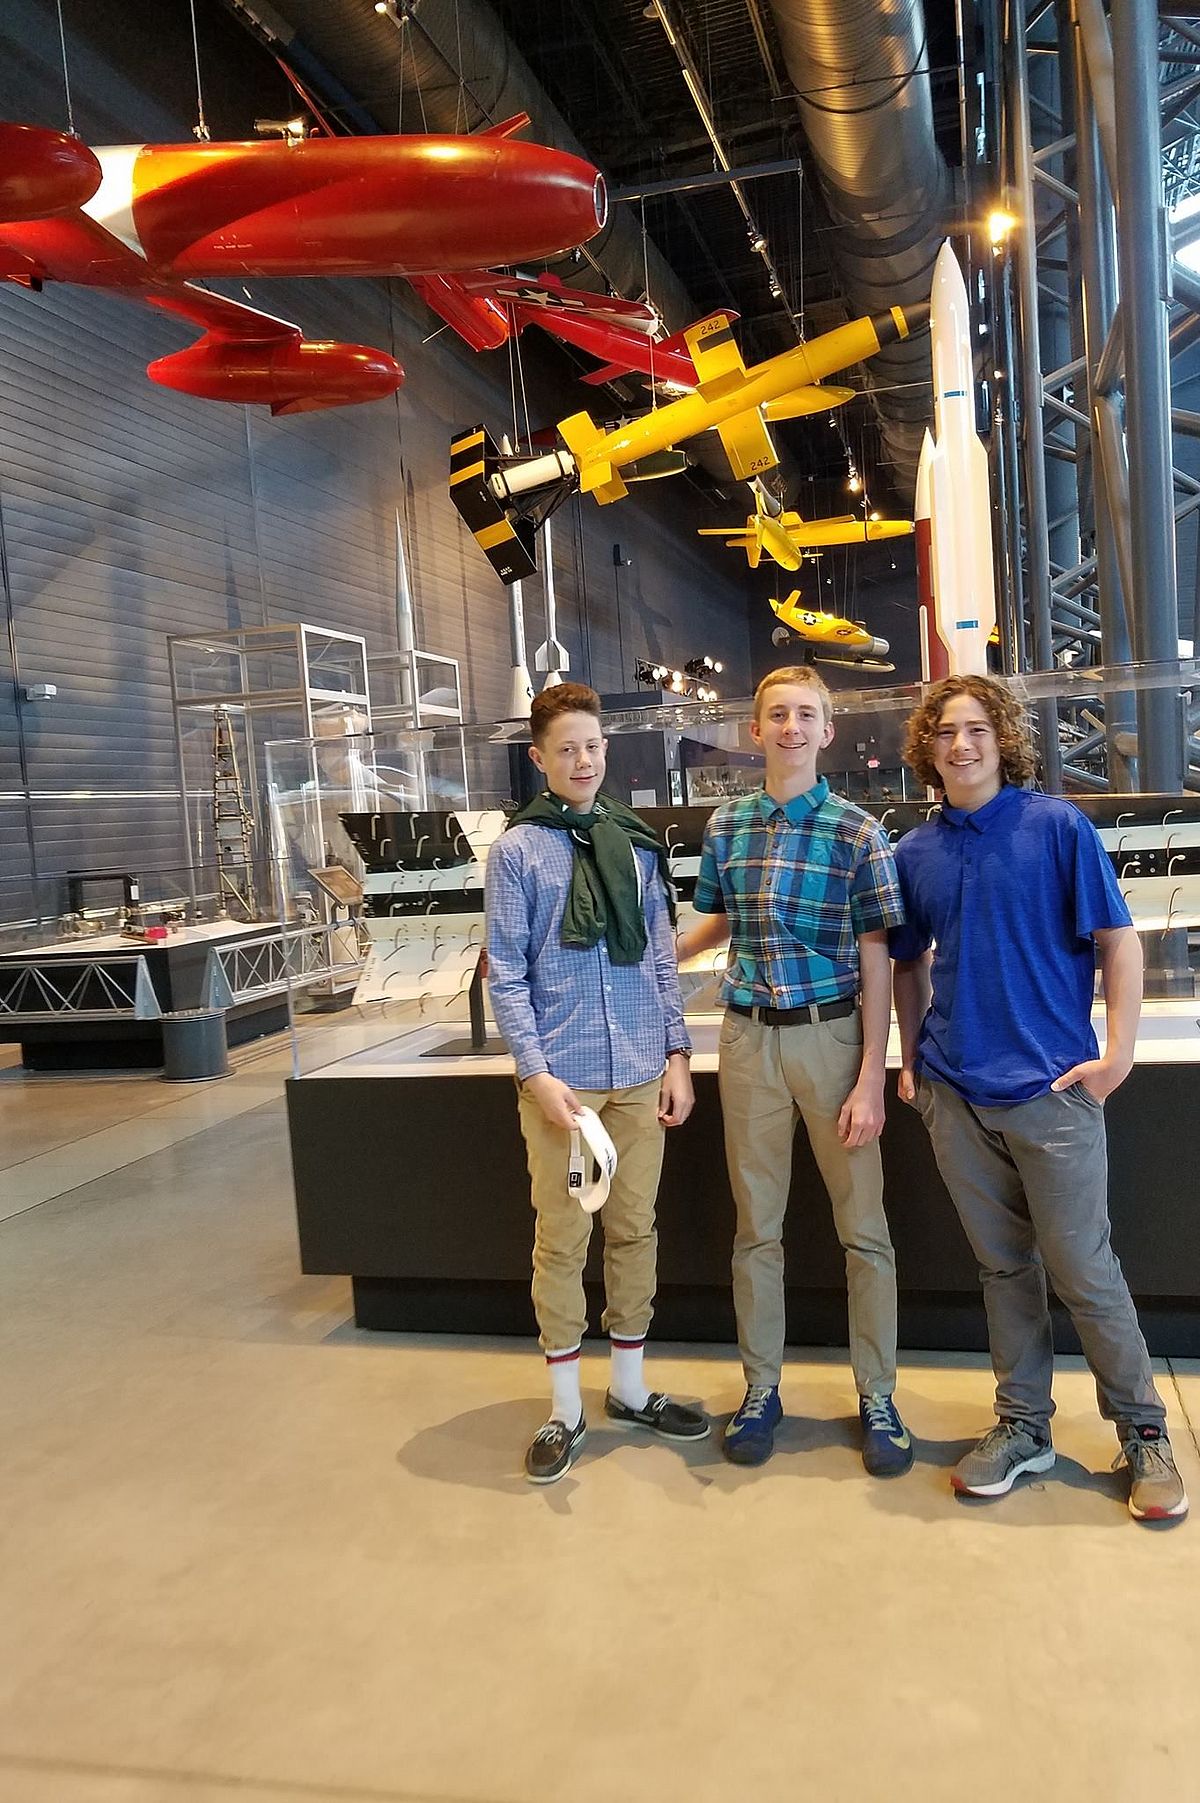 Students at the Aerospace Museum